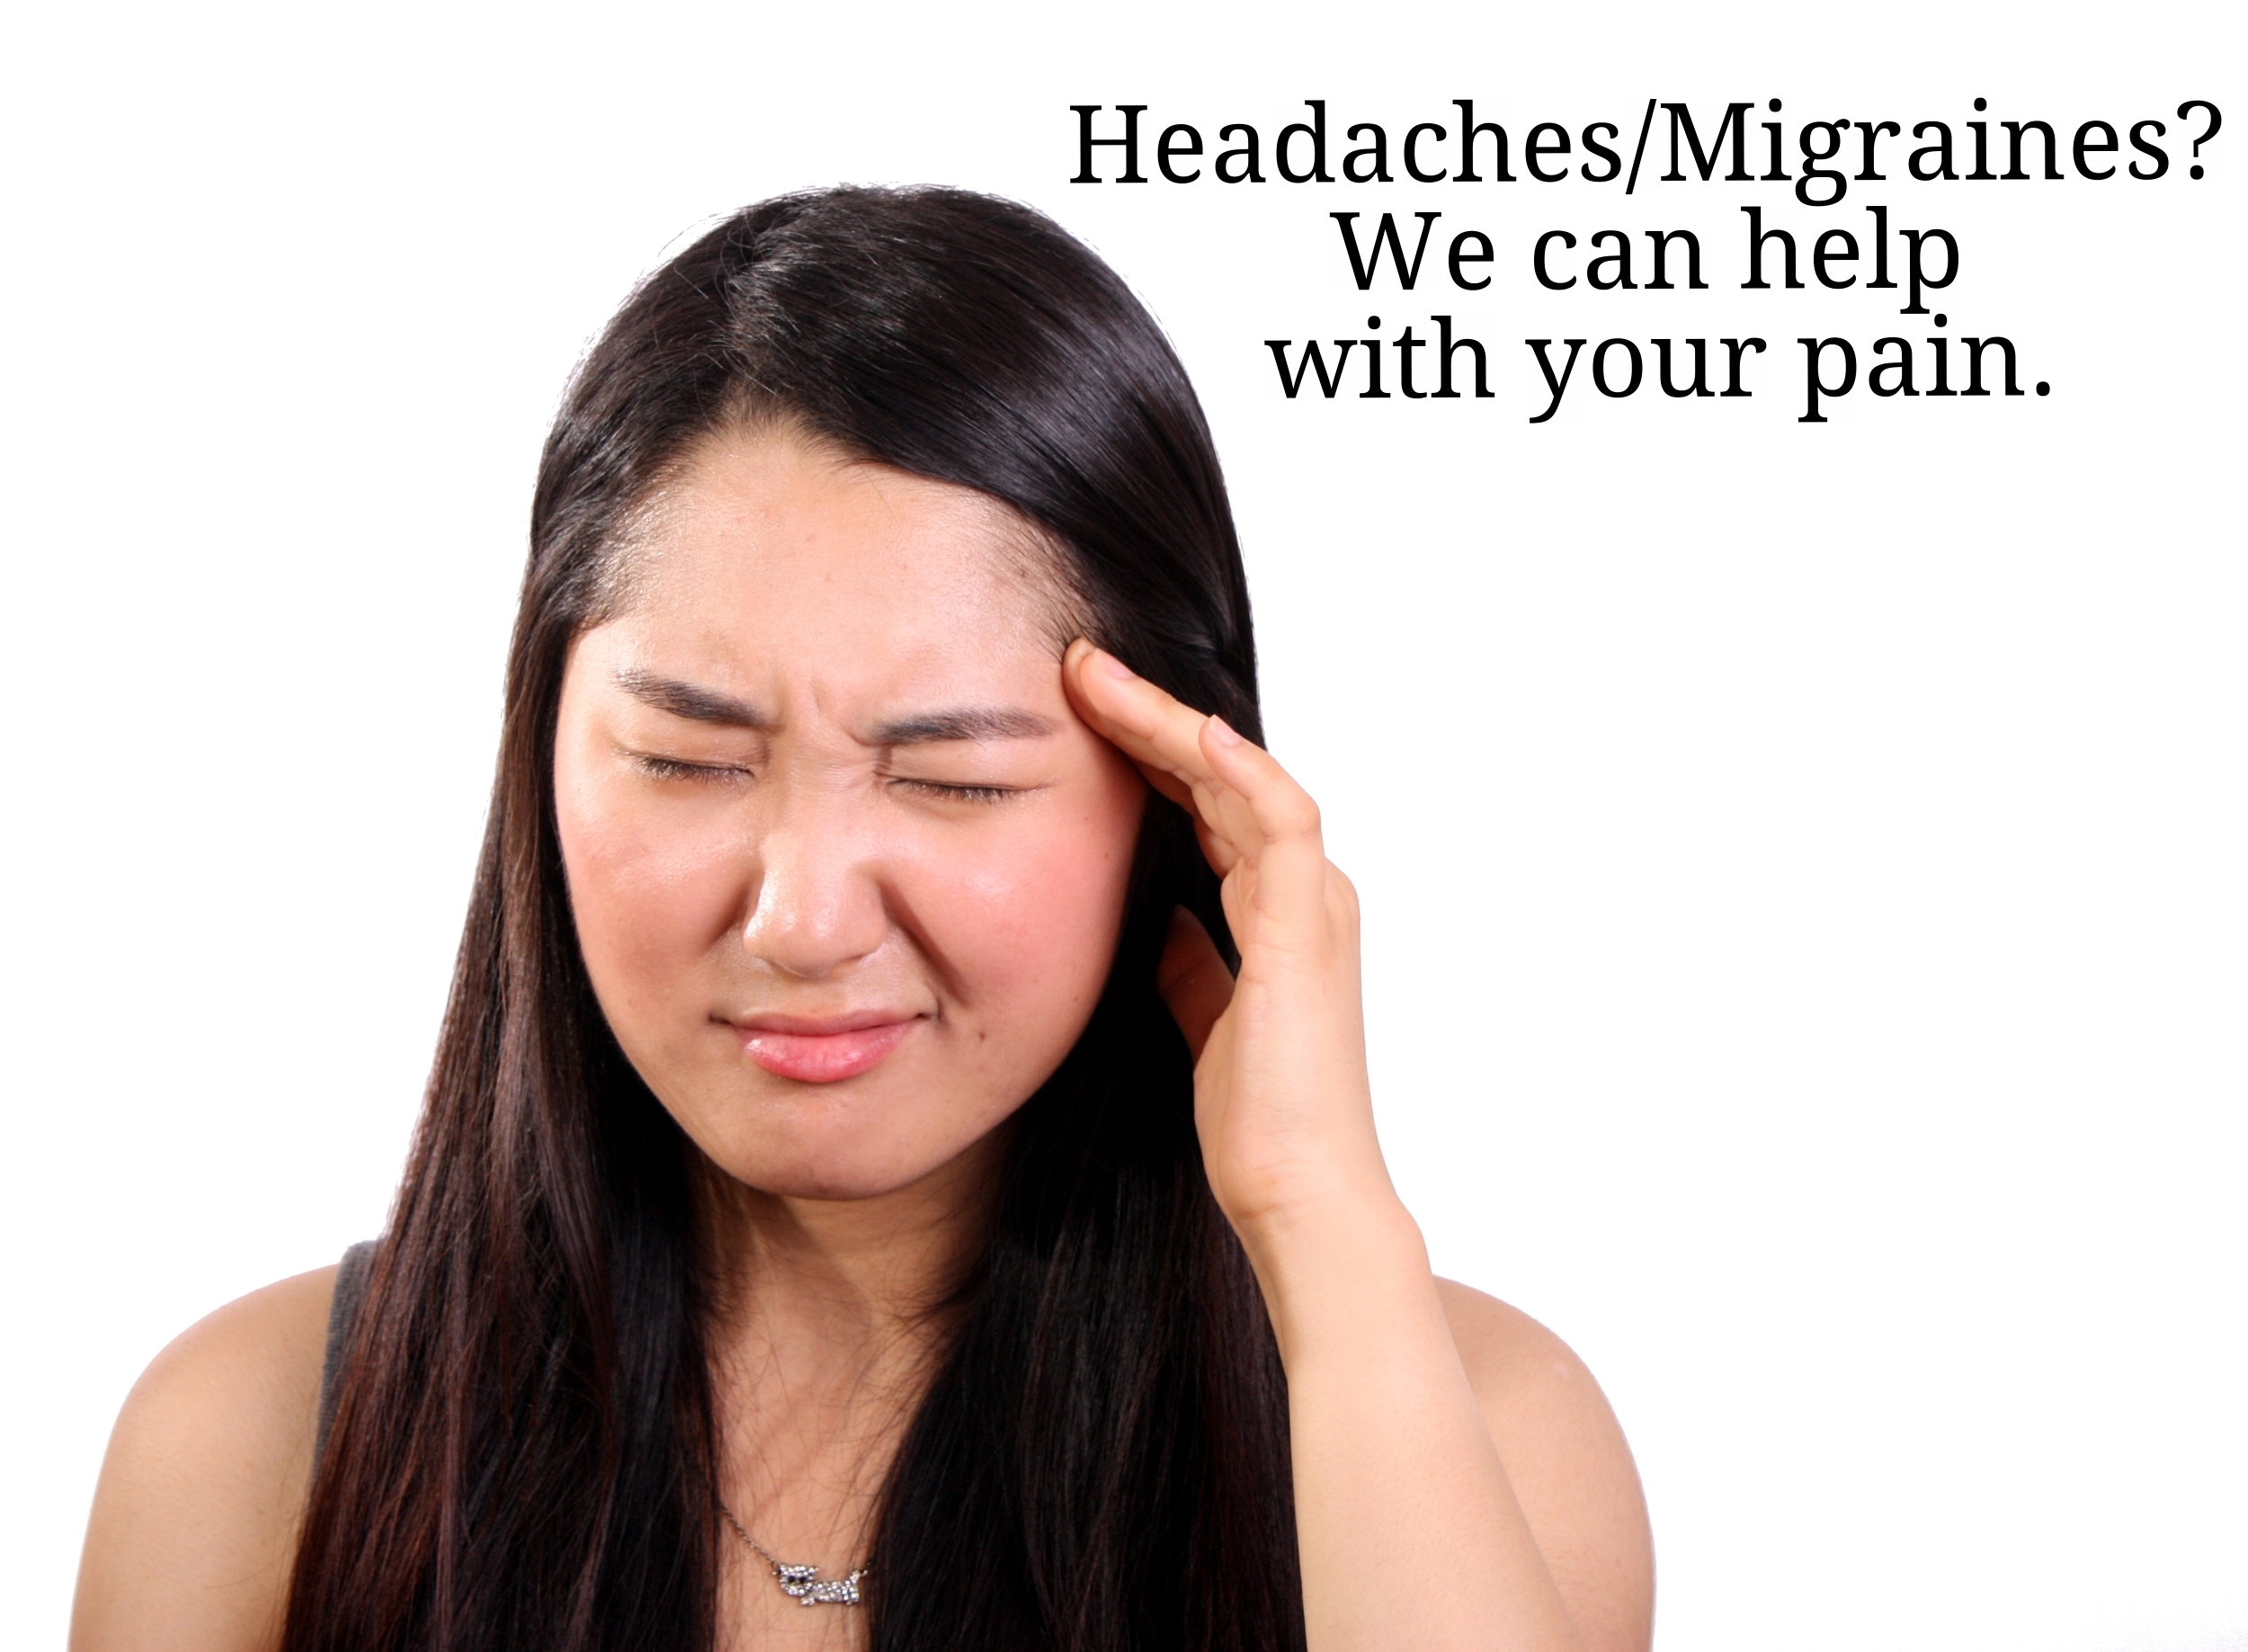 Headaches/migraines? We can help with your pain (A woman rubs her temple).